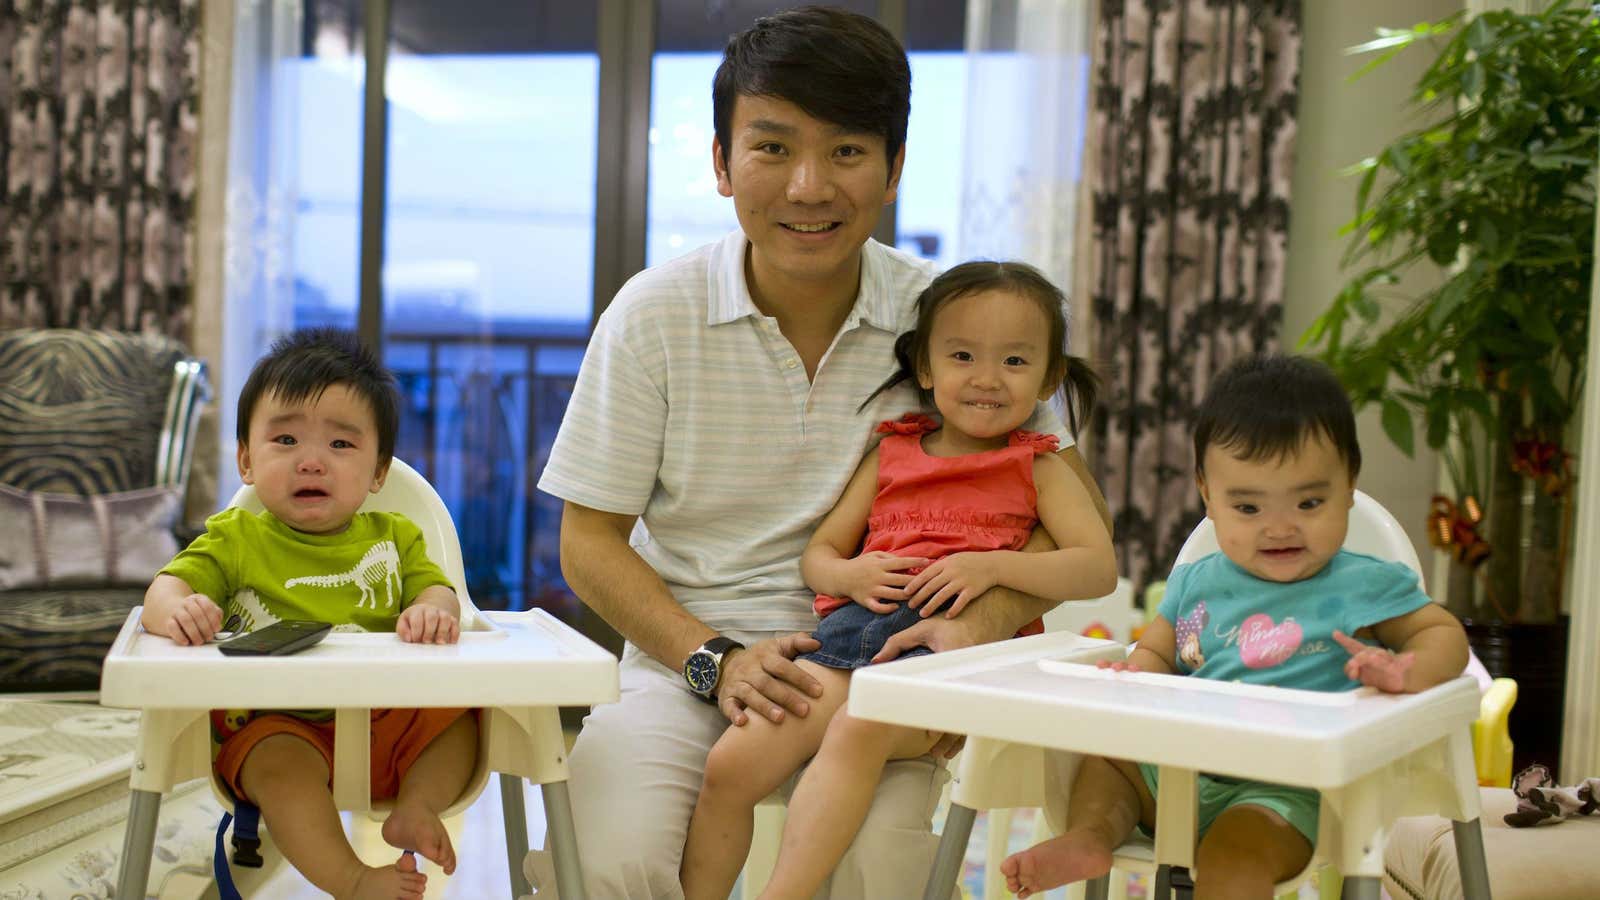 A businessman in Shanghai, Tony Jiang poses with his three children, born in California to an American surrogate.